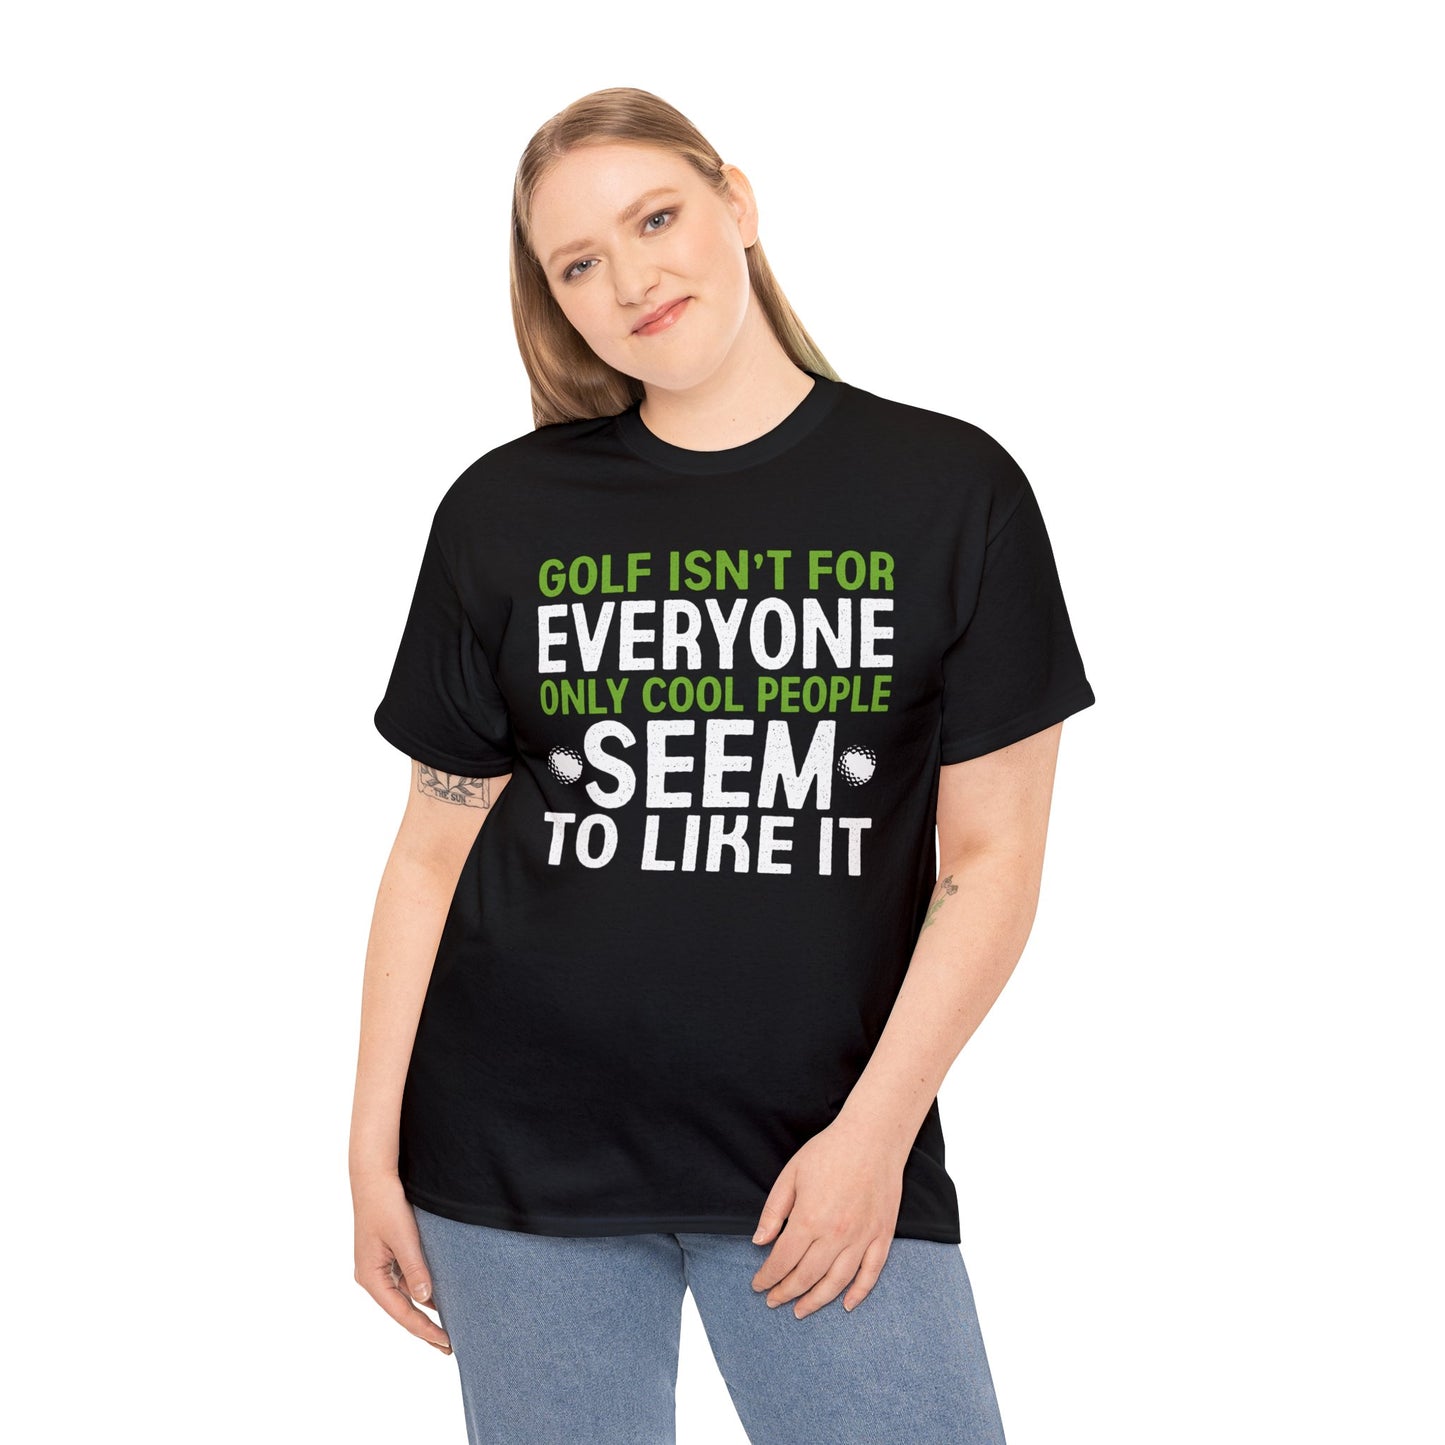 Unique 'Golf Is Not for Everyone, Only Cool People SEEM To Like It' Shirt!